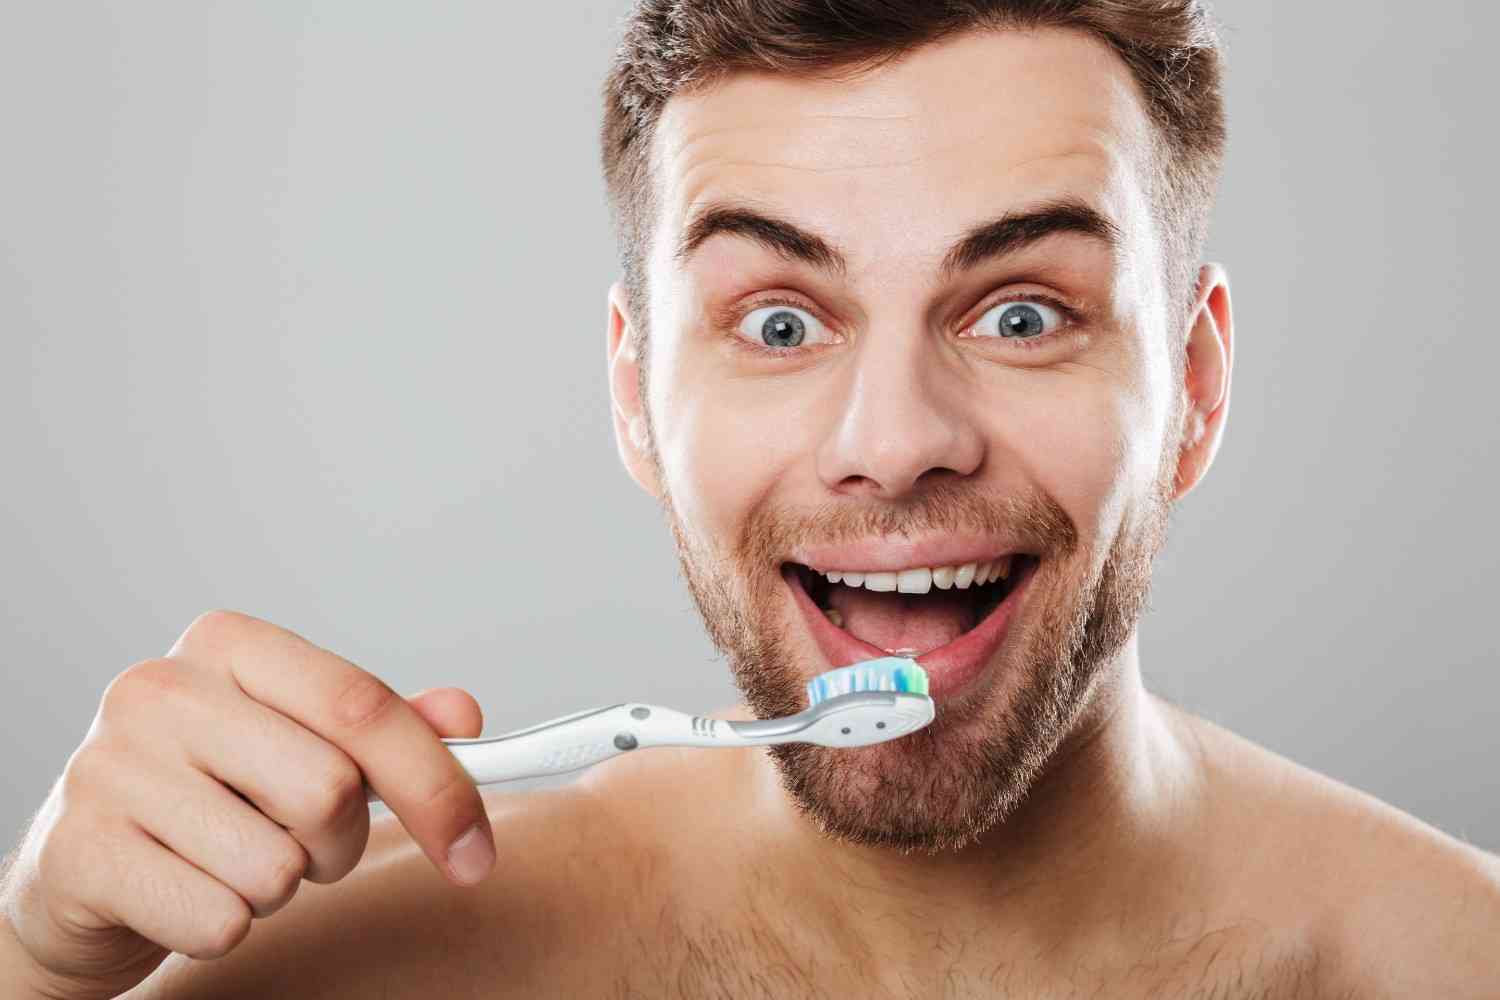 Do you brush your teeth before wisdom teeth removal